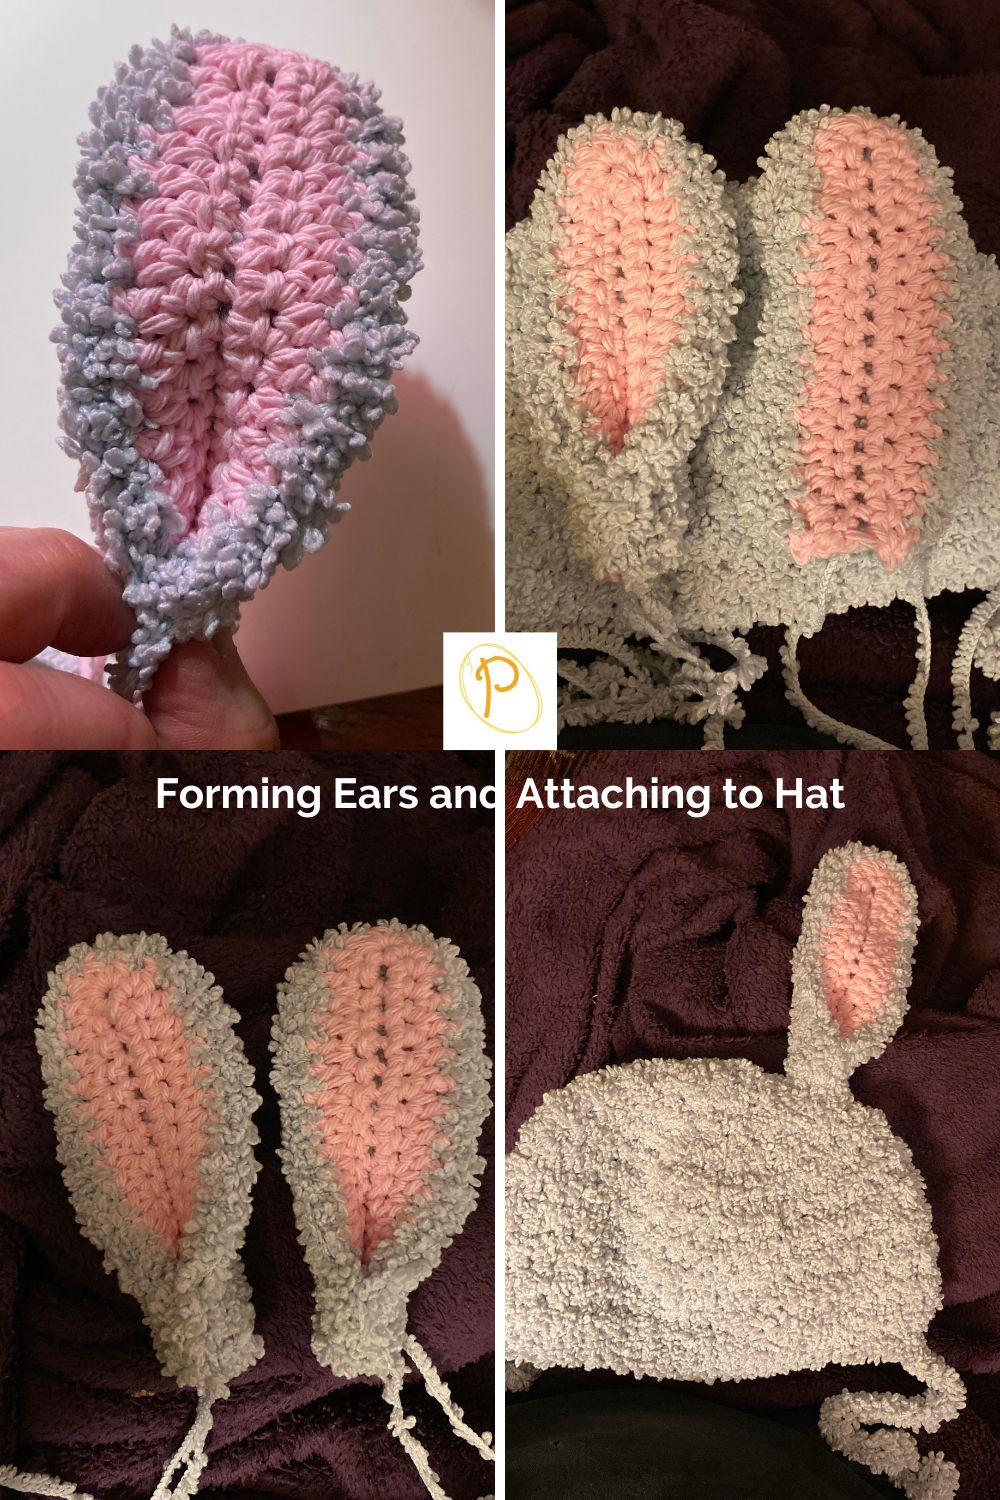 Forming Ears and Attaching to Hat